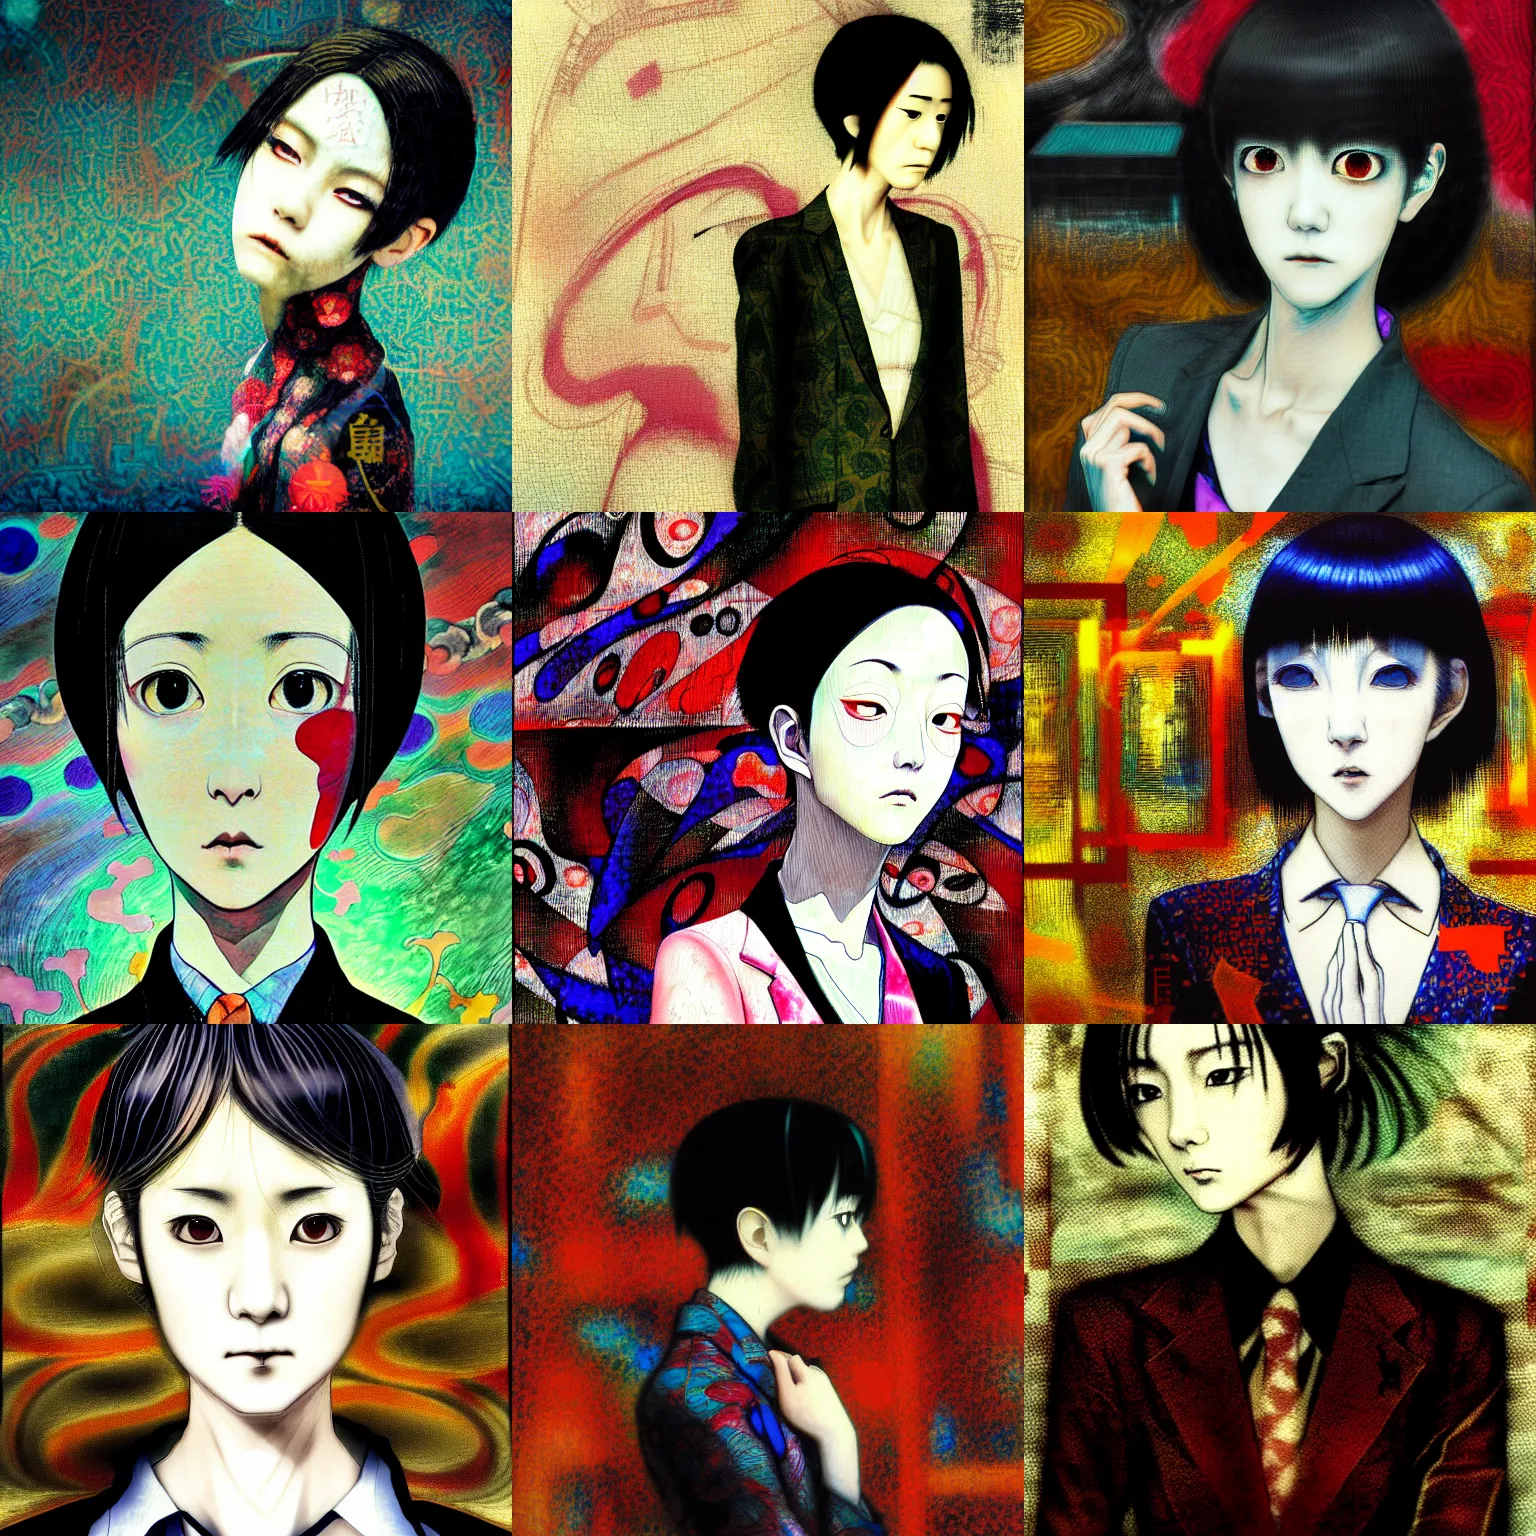 Prompt: yoshitaka amano blurred and dreamy stylized three quarter angle portrait of a young woman with short hair and black eyes wearing dress suit with tie, junji ito abstract patterns in the background, satoshi kon anime, noisy film grain effect, highly detailed, renaissance oil painting, weird portrait angle, blurred lost edges